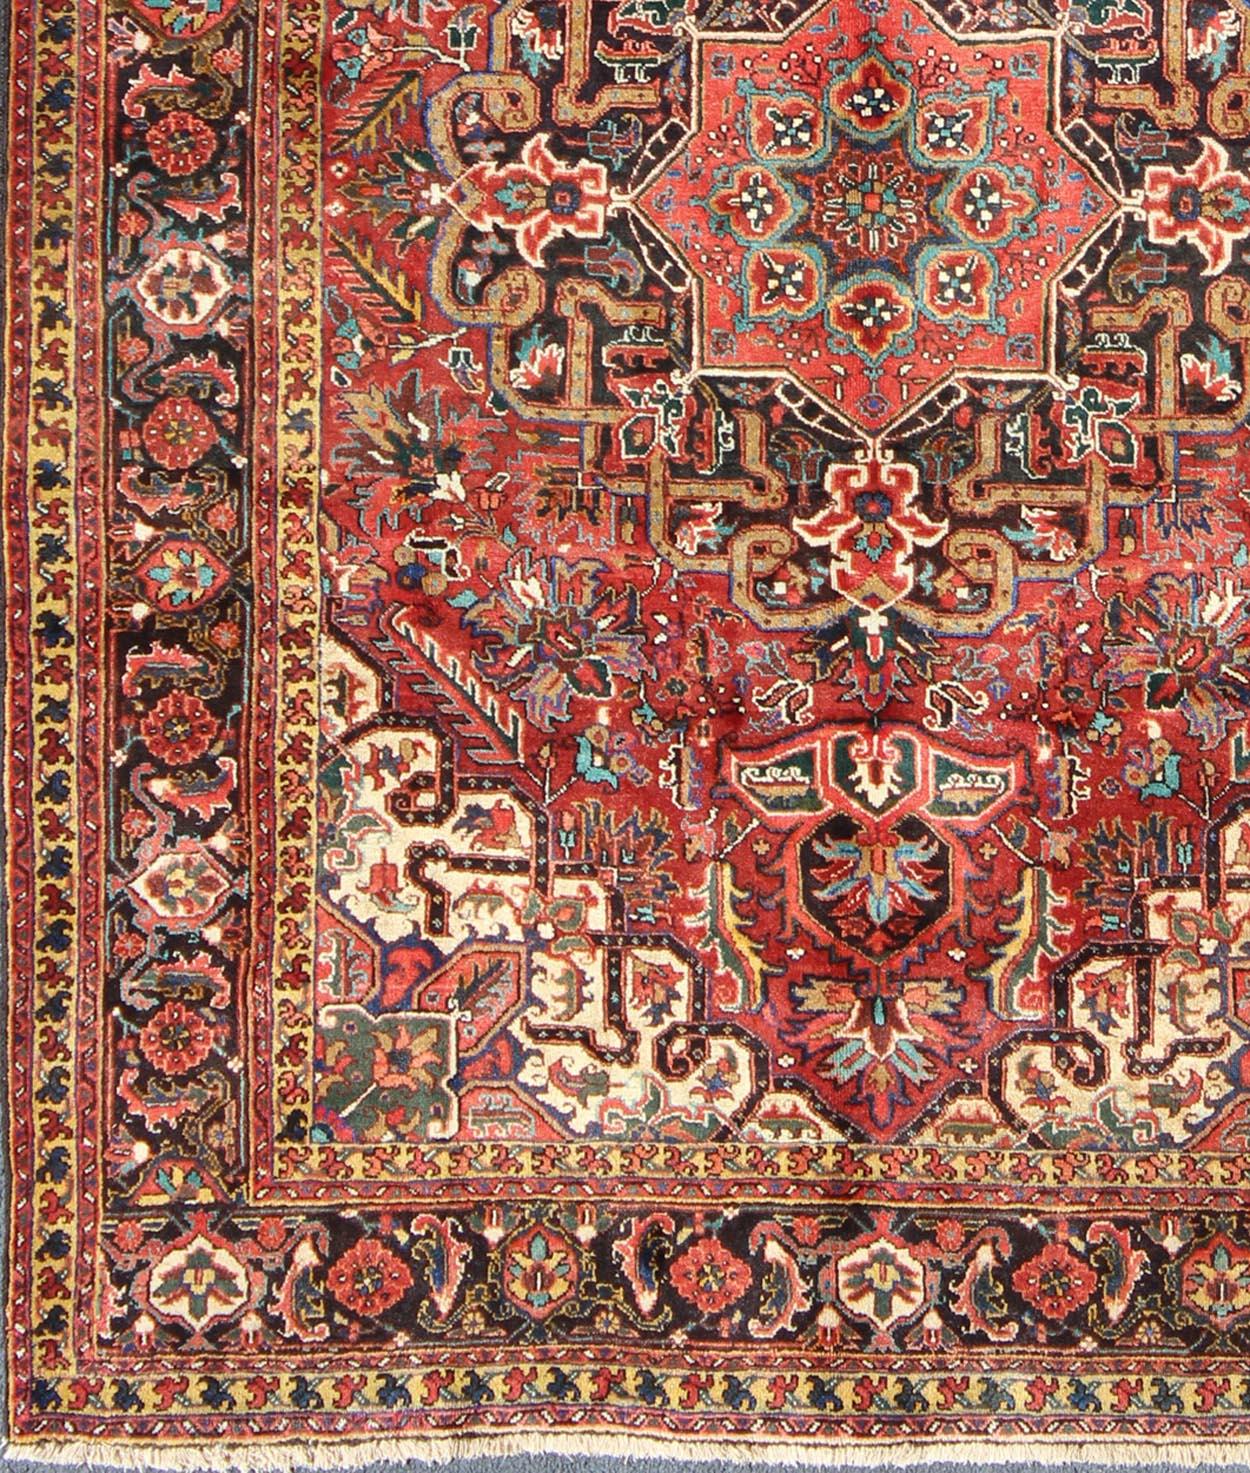 Floral medallion vintage Persian Heriz rug in red, blue, and golden yellow, rug h-501-34, country of origin / type: Iran / Heriz, circa 1950.

This magnificent vintage Persian Heriz carpet from the mid-20th century (circa 1950) bears an exquisite